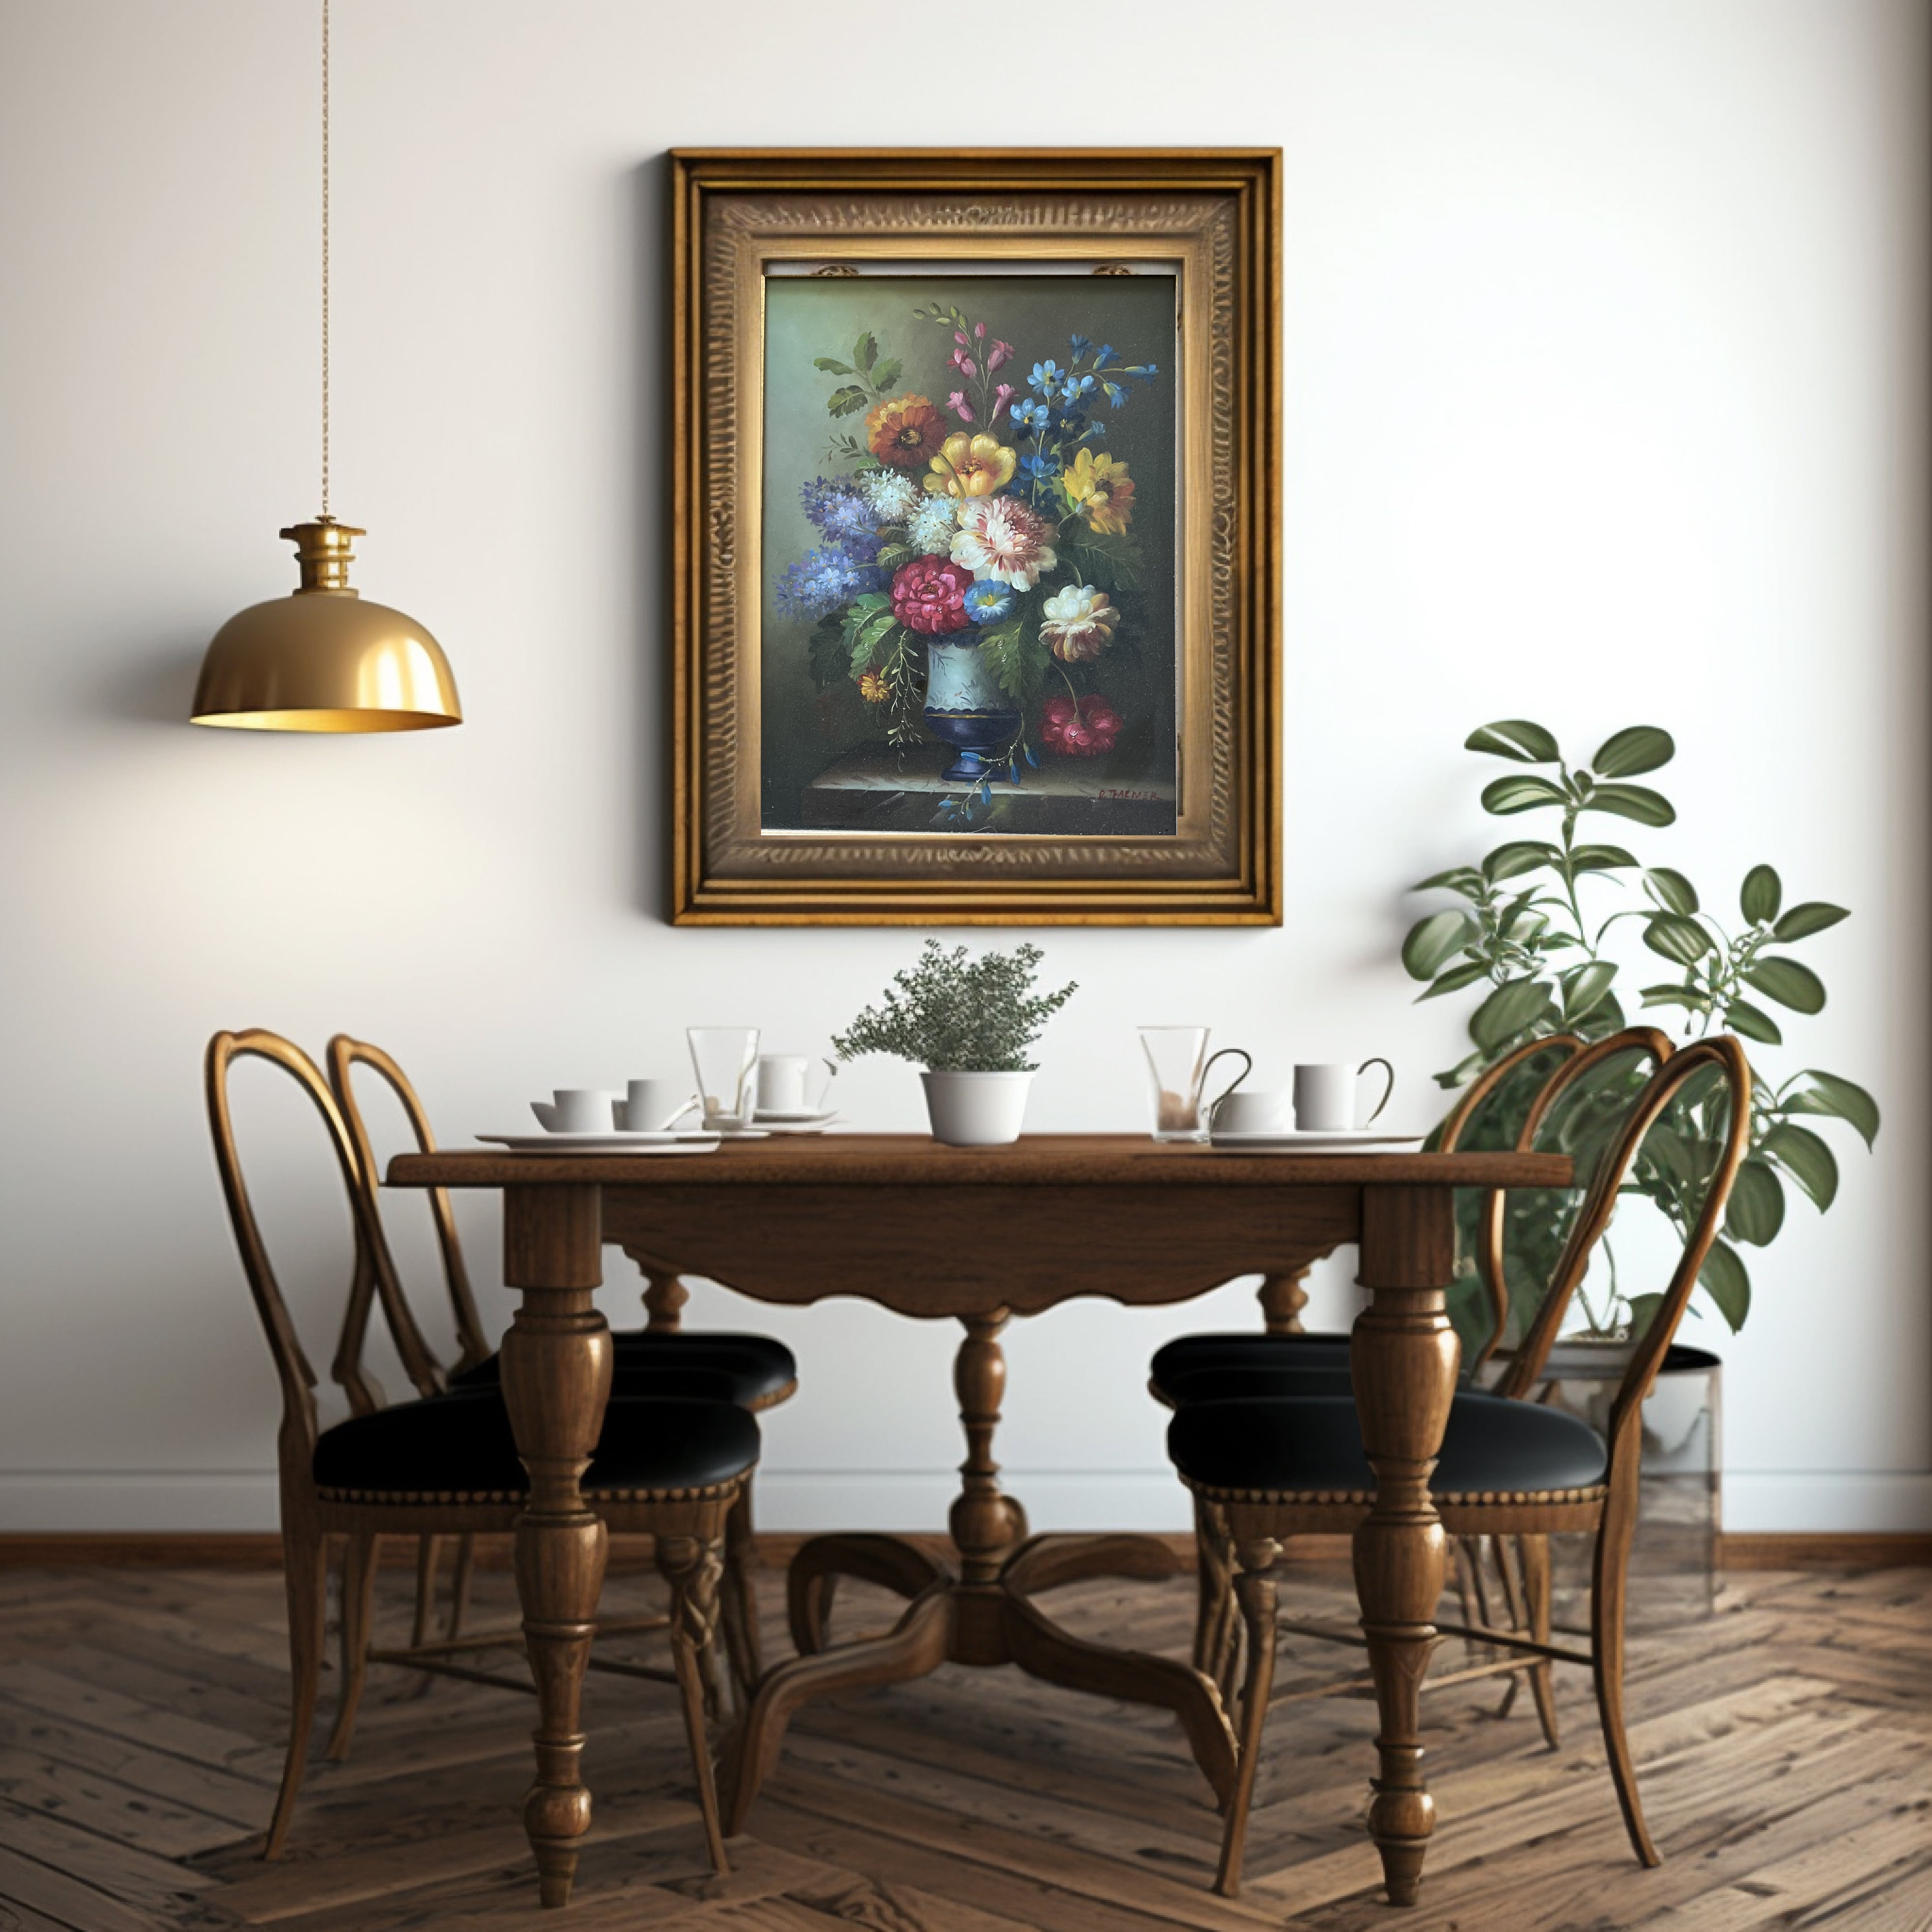 Vintage Floral Hand Painting in Golden Frame Oil on Wood French Art